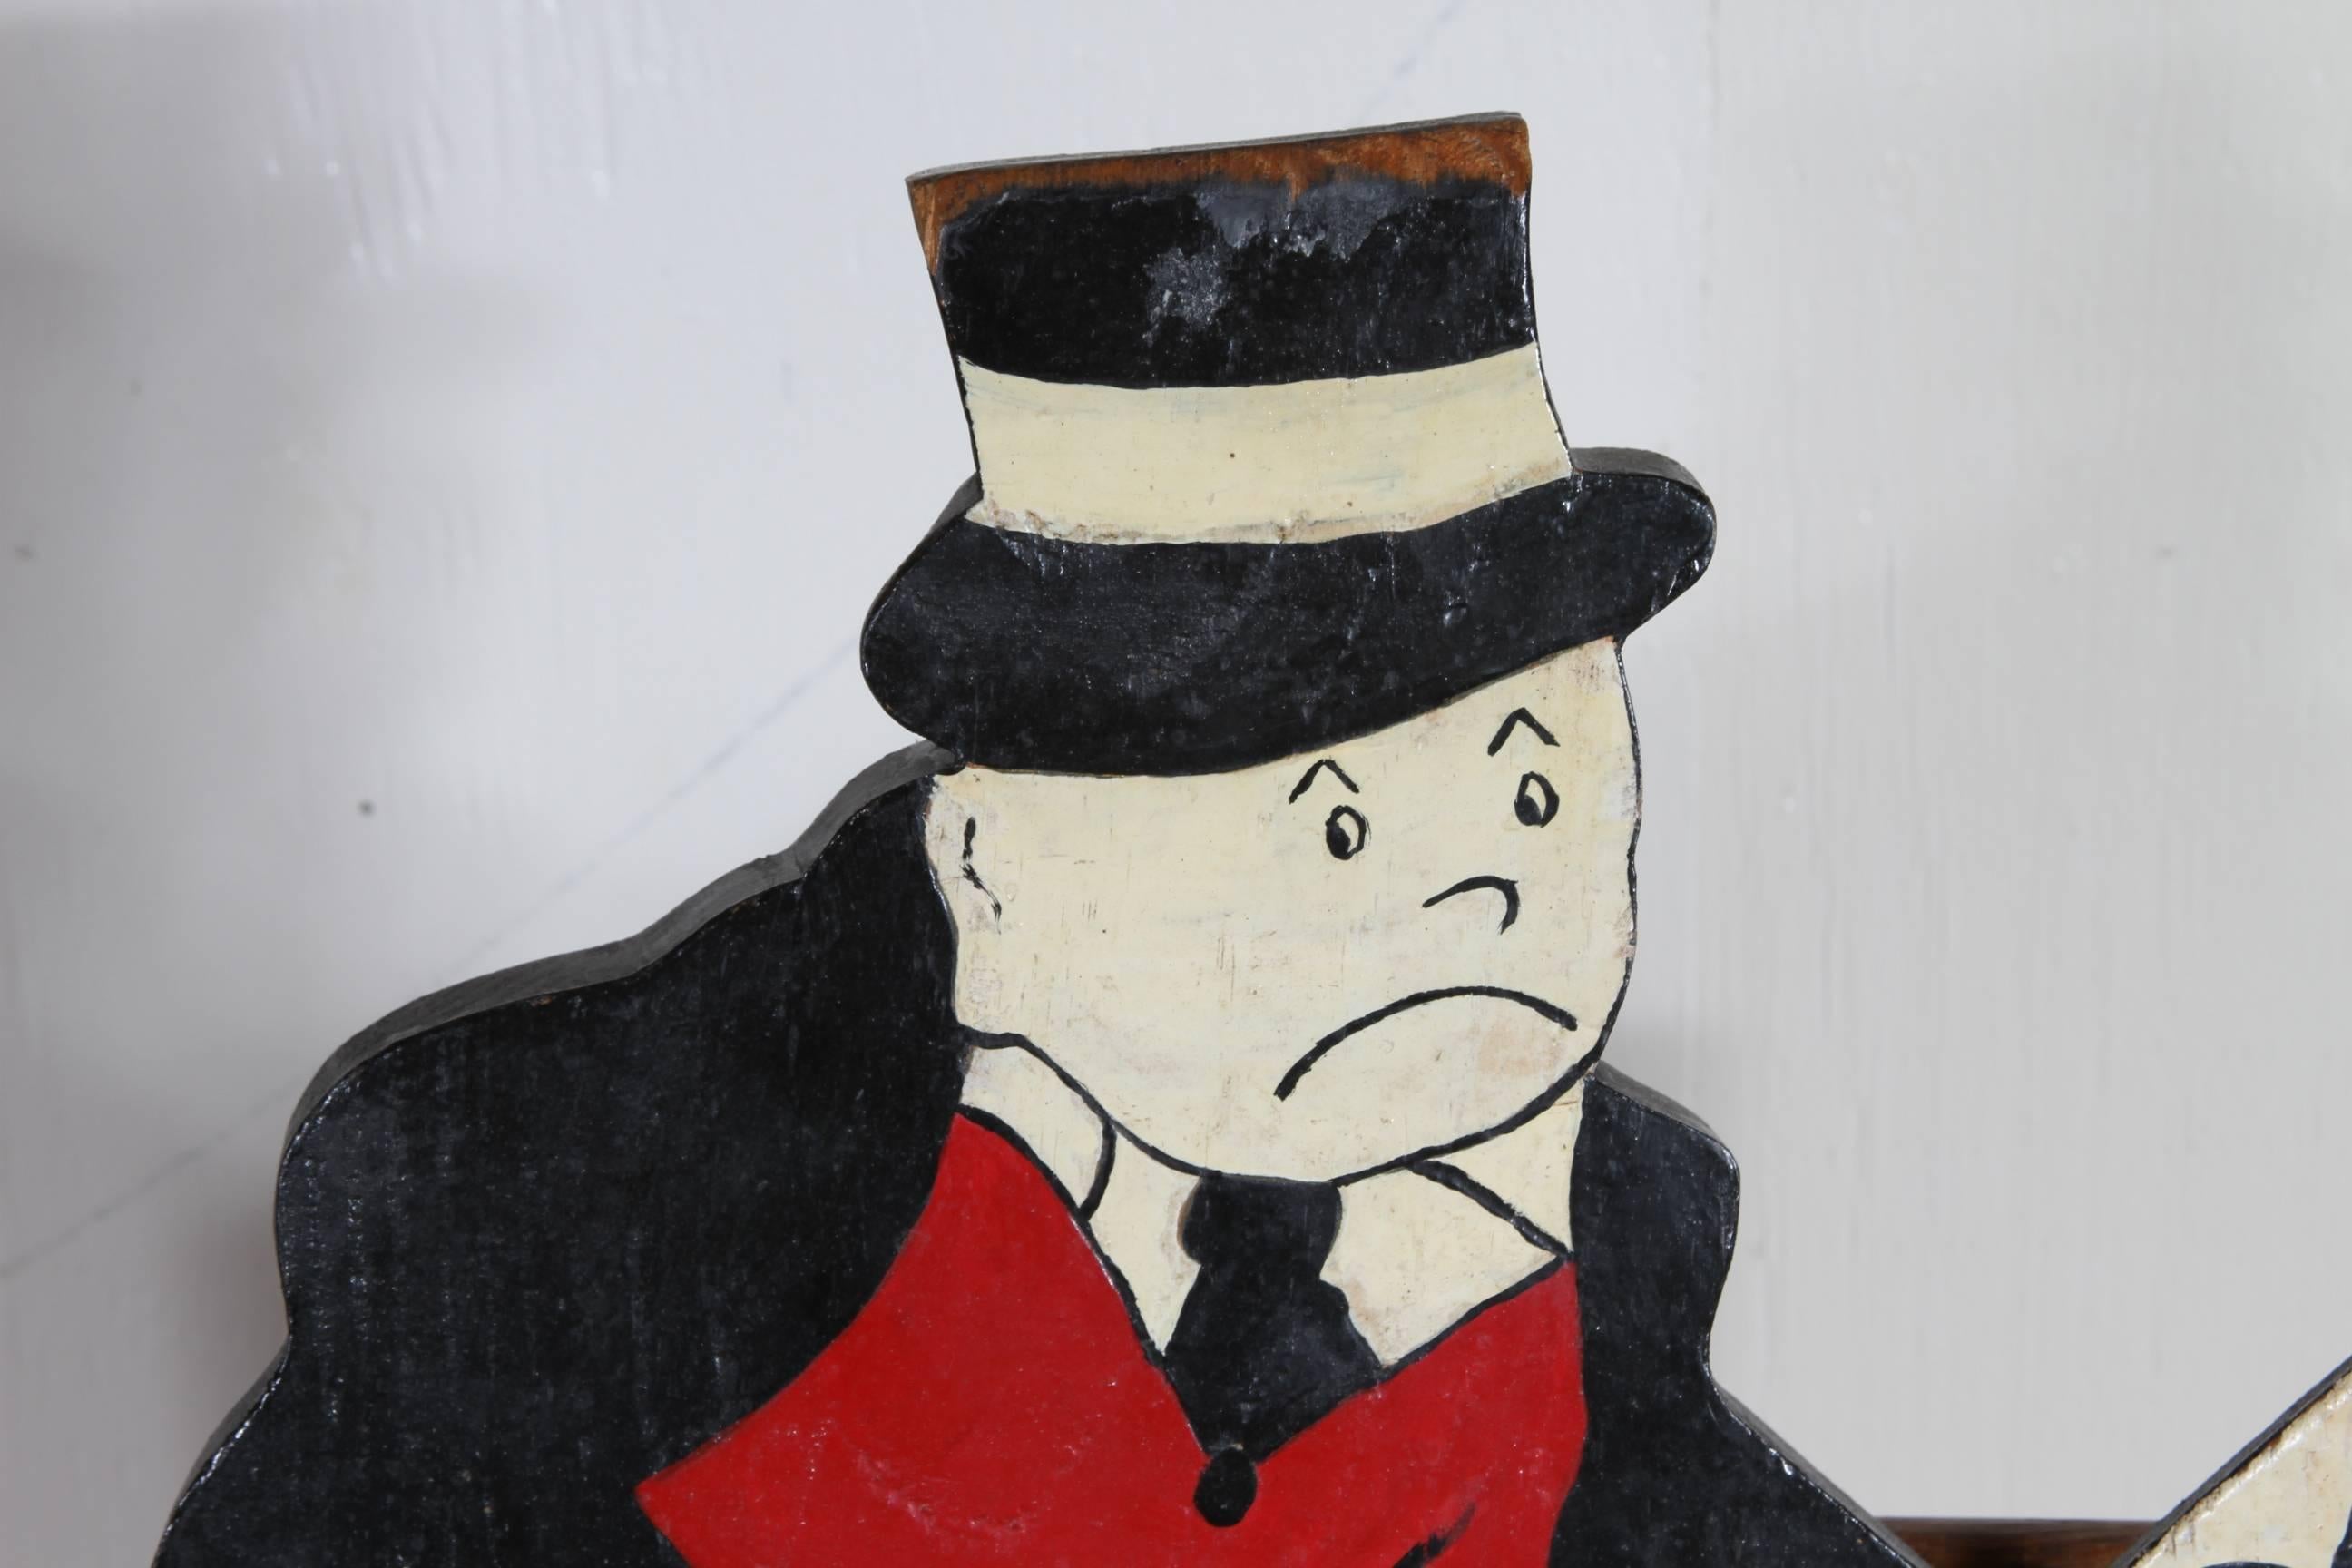 Slats, possibly from a sign, are attached to the back and under the seat. The character resembles the main character from the Monopoly board game, dressed in black and red with a top hat, cane and suit with vest.